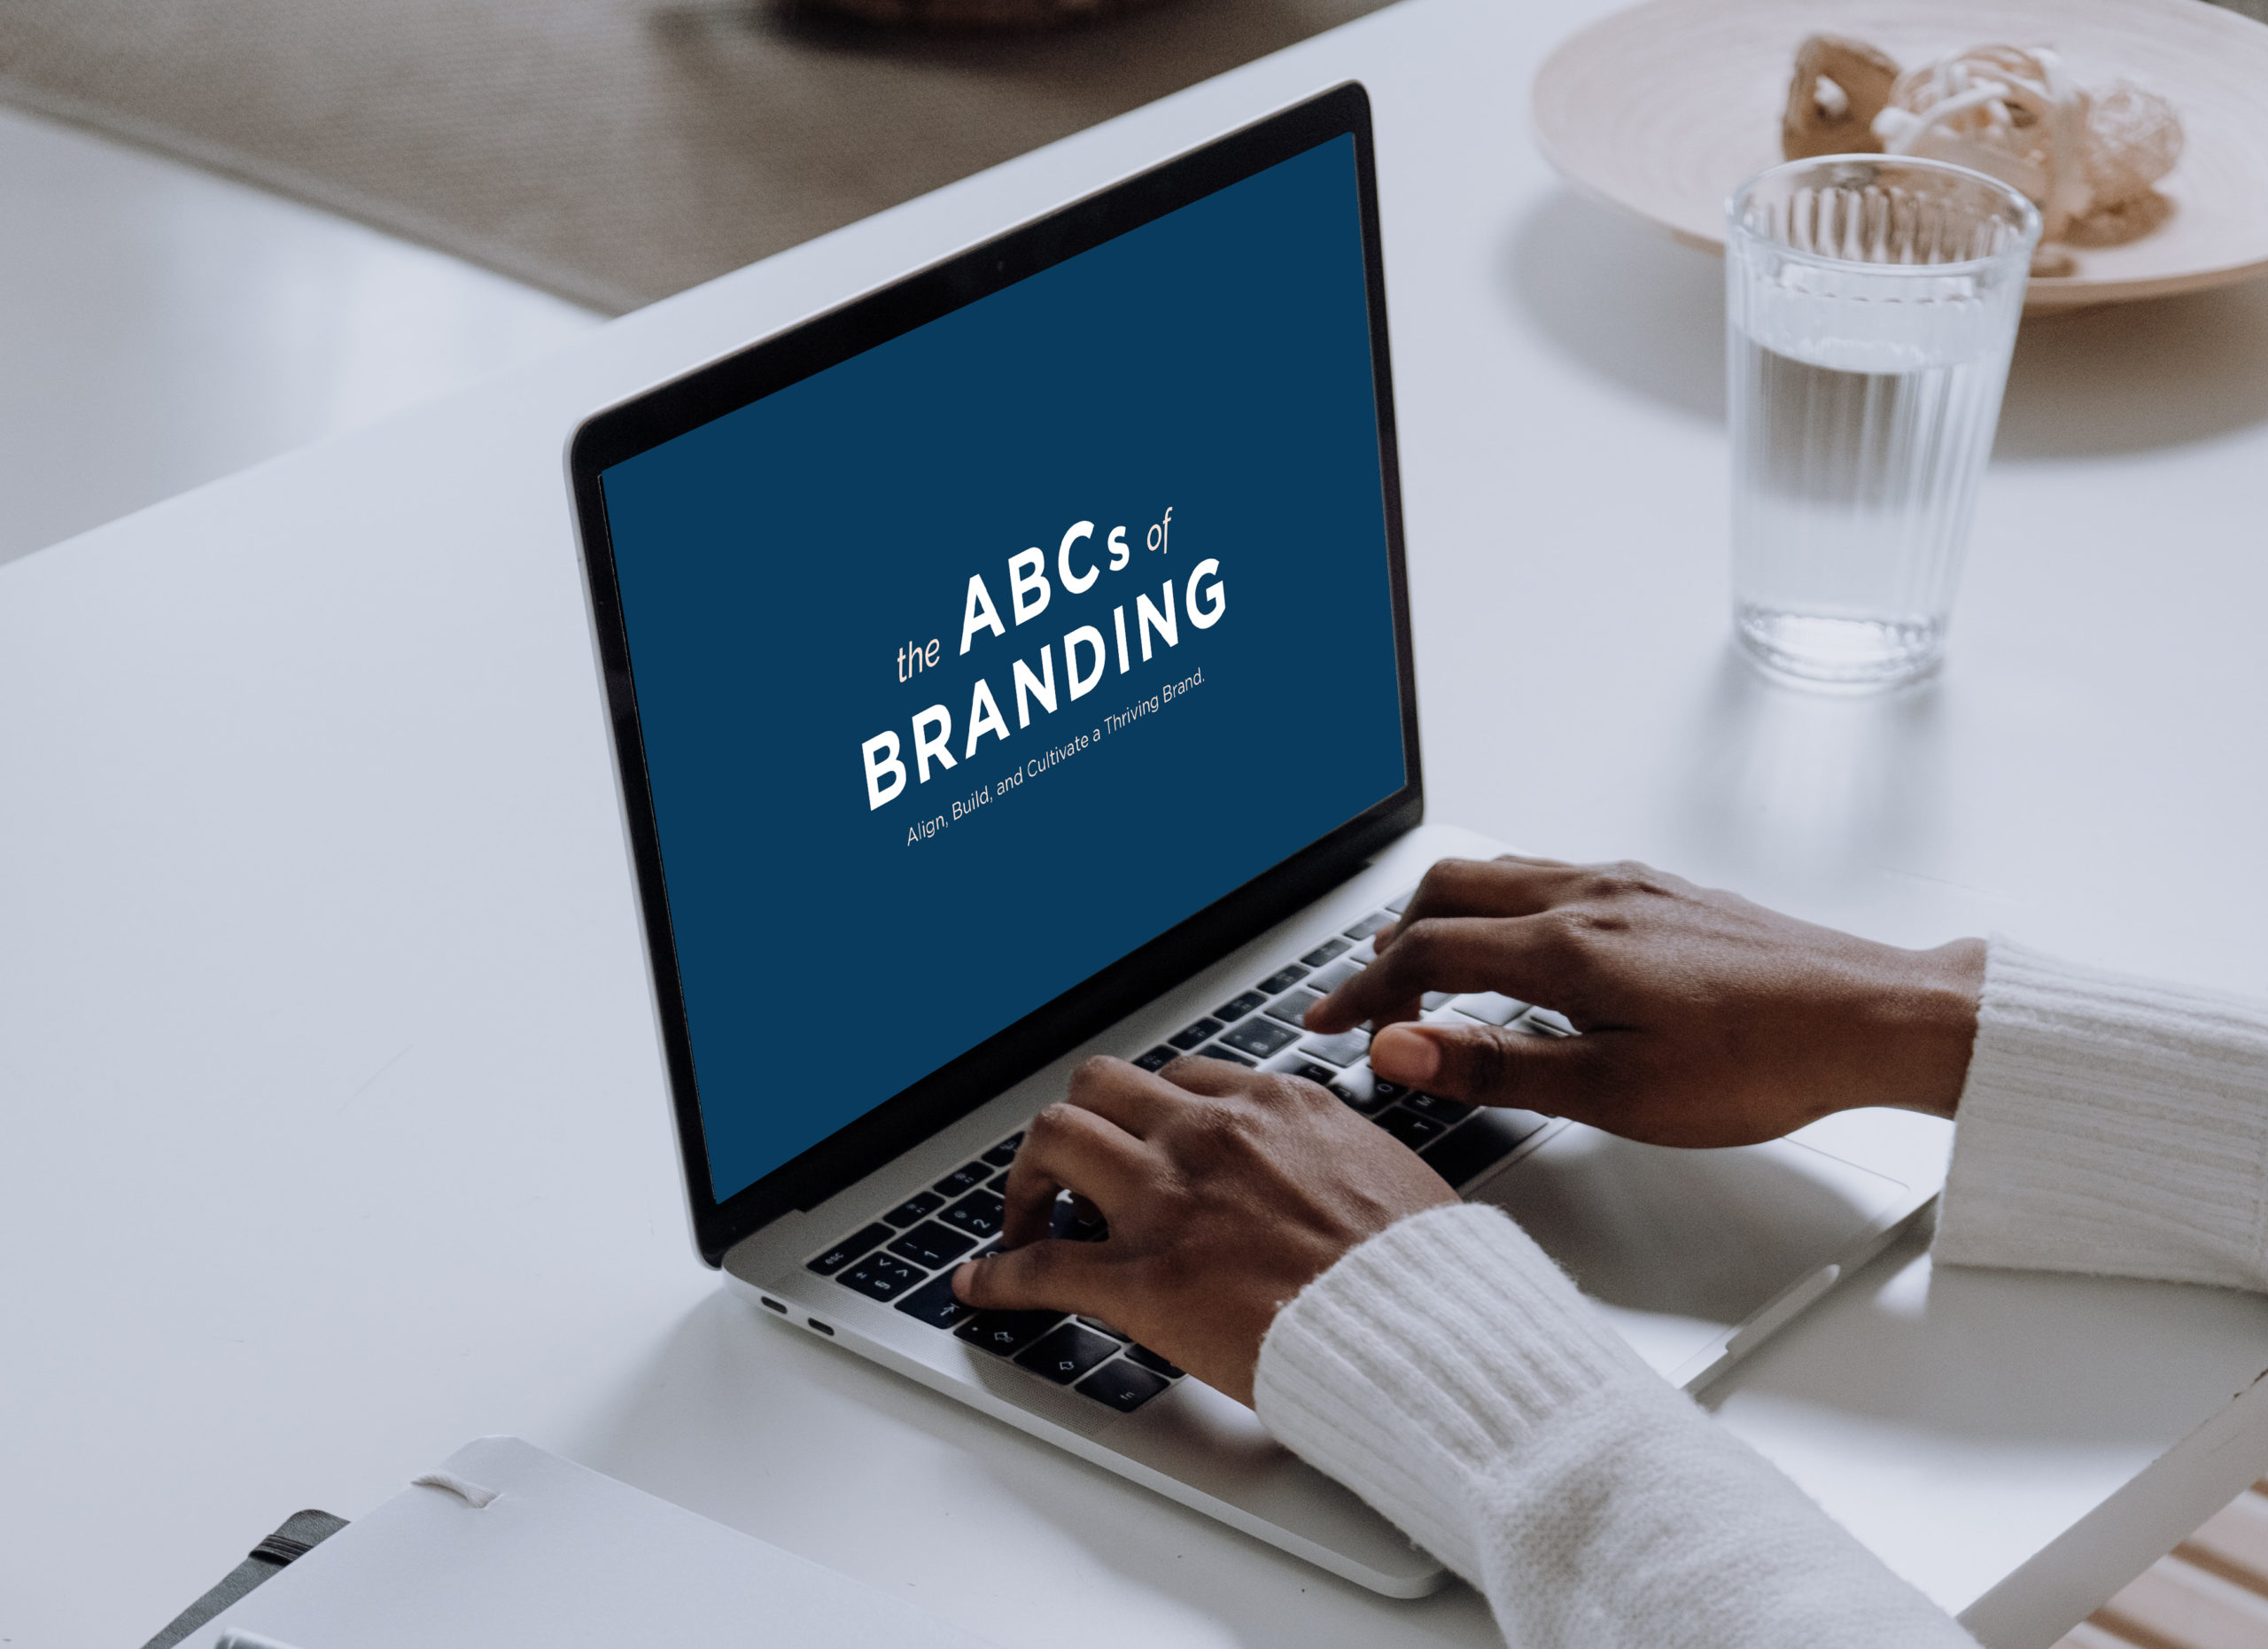 Branding basics with these simple ABCs of branding by Sung and Co